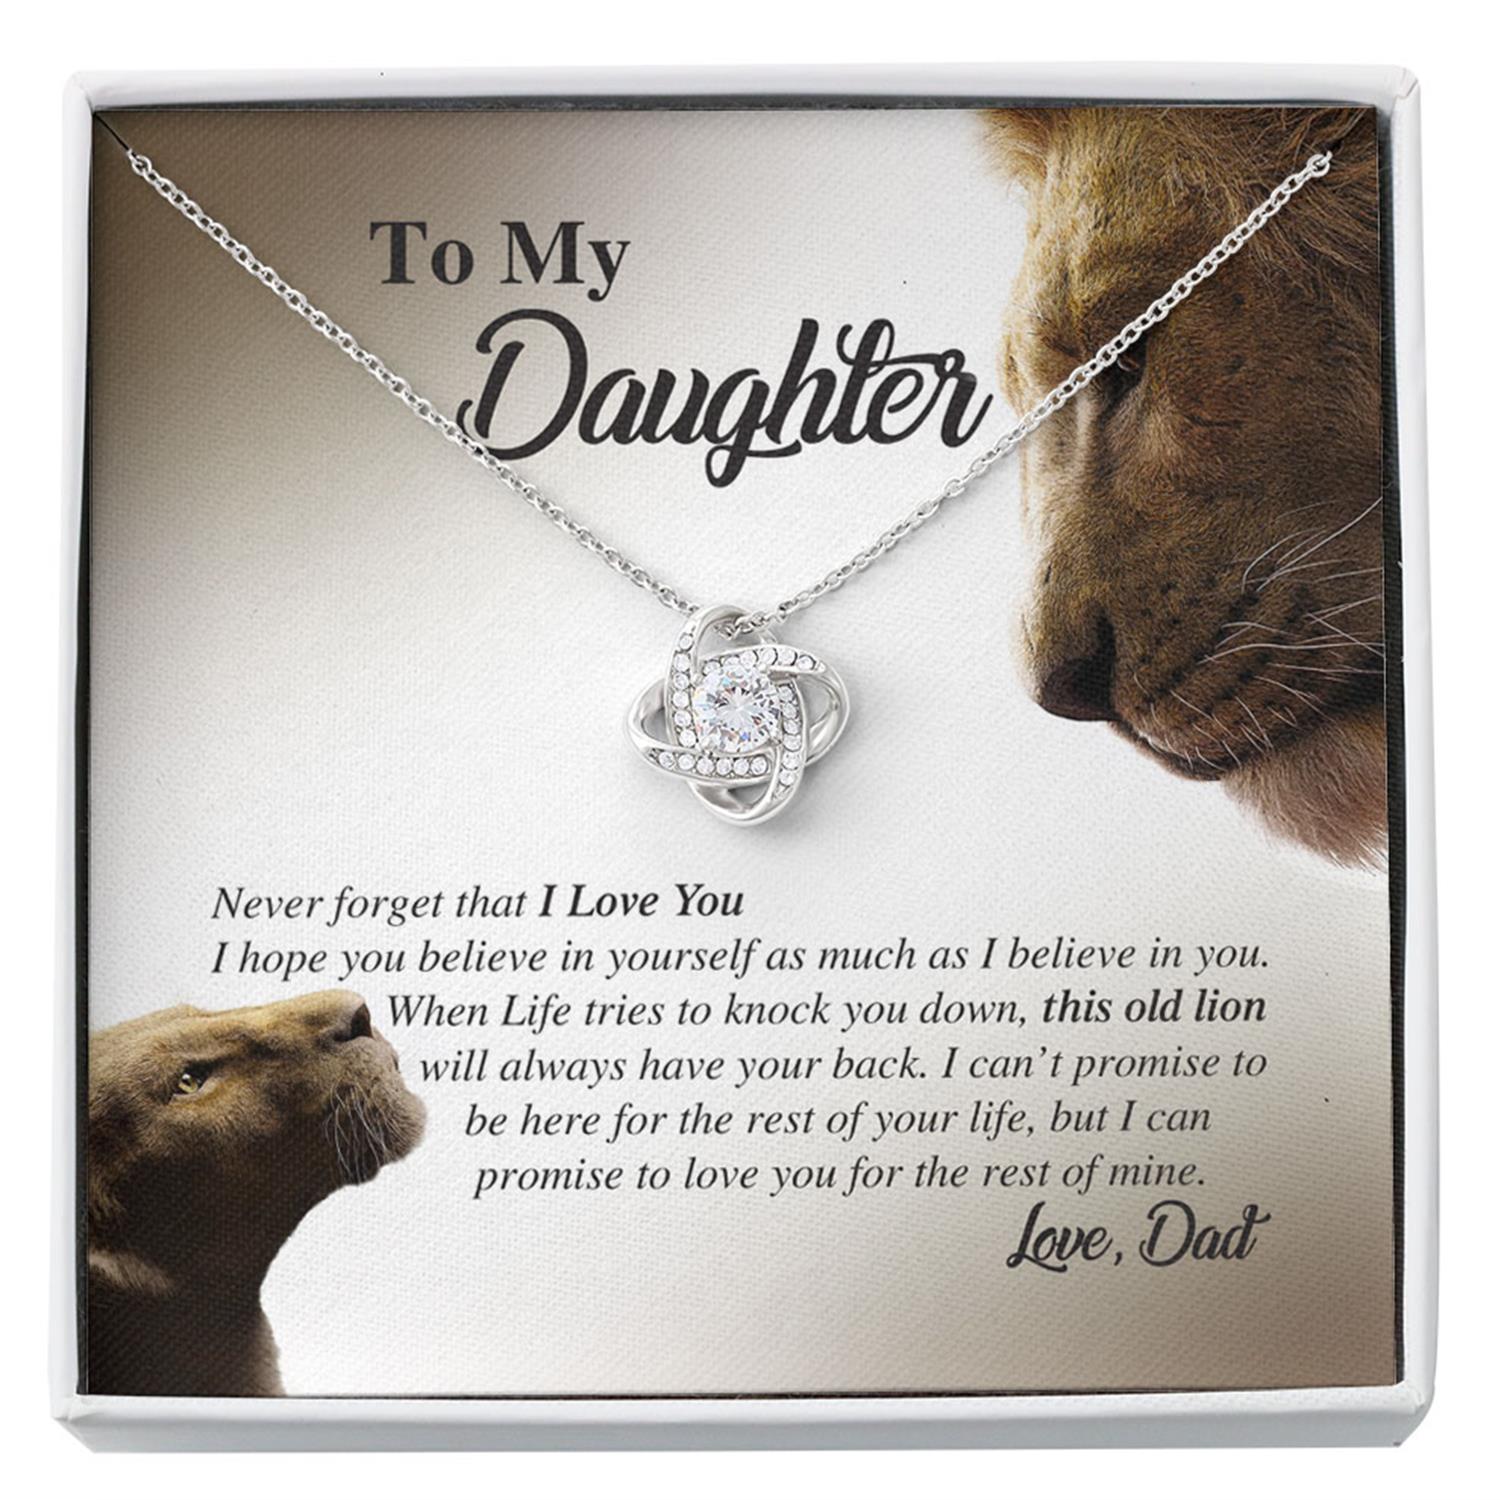 Daughter Necklace, To My Daughter Necklace Gift - This Old Lion Will Always Have Your Back Custom Necklace V3